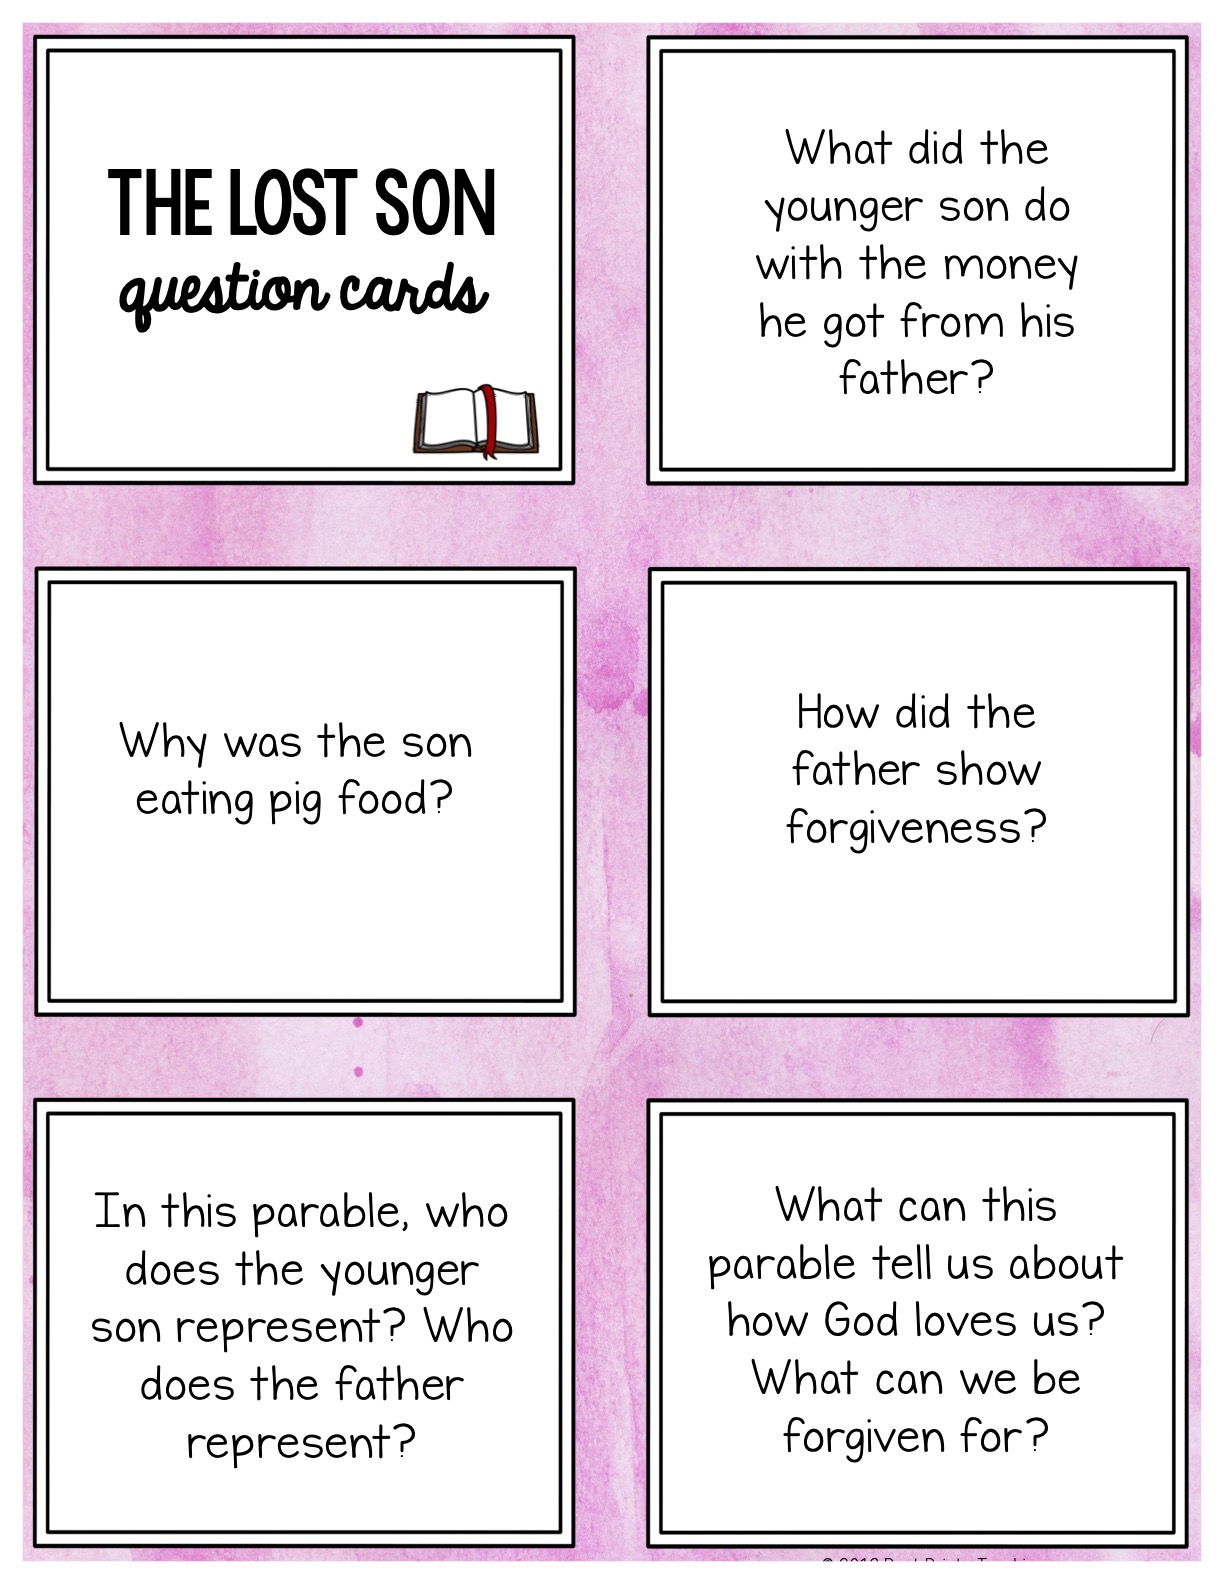 6. Bible Story Question (Lost Son).jpg